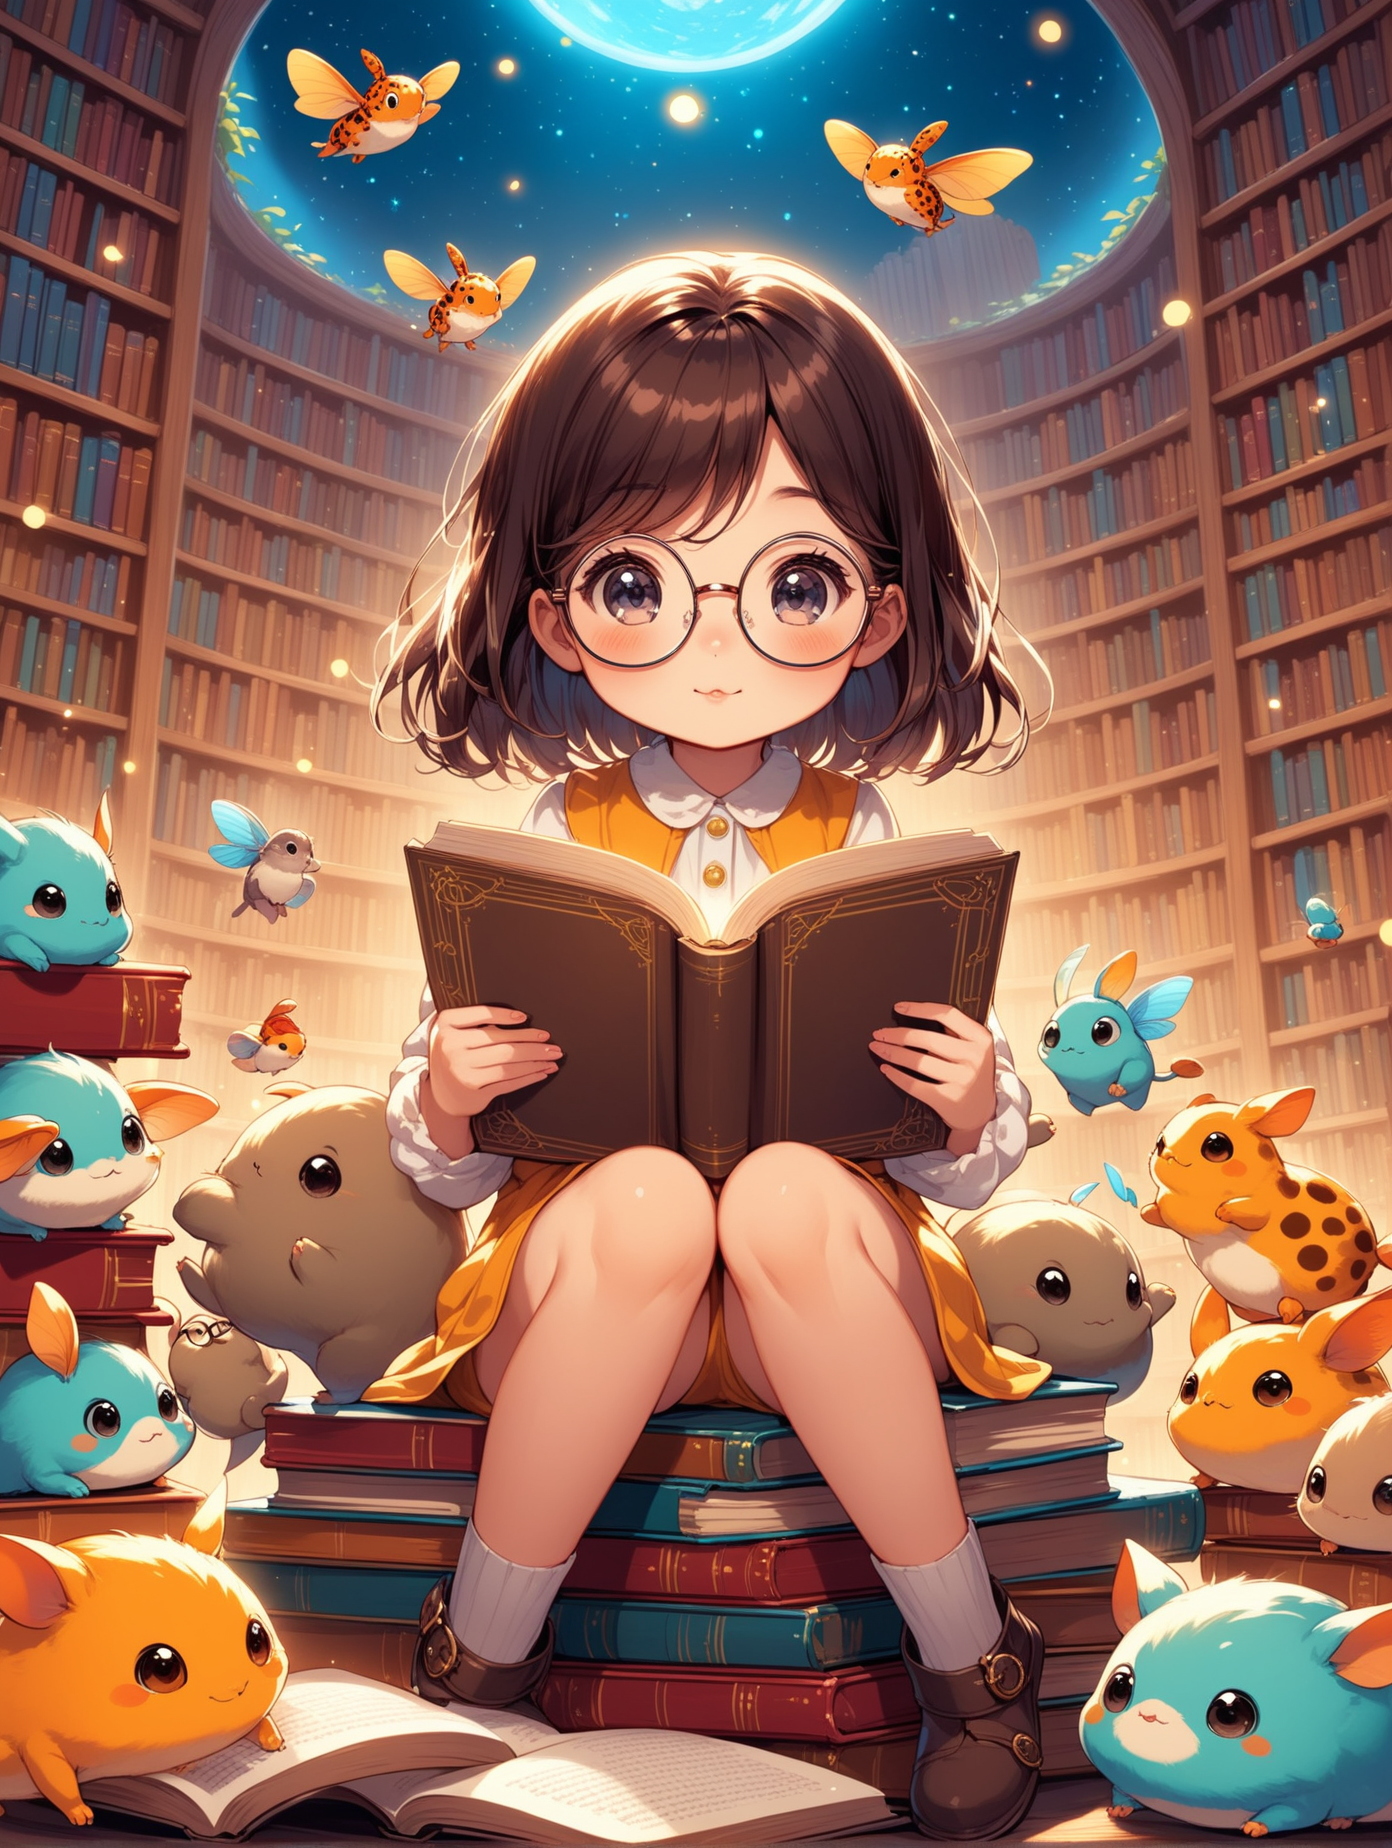 Adorable Cartoon Girl with Round Glasses Reading Surrounded by Fantasy Library Creatures